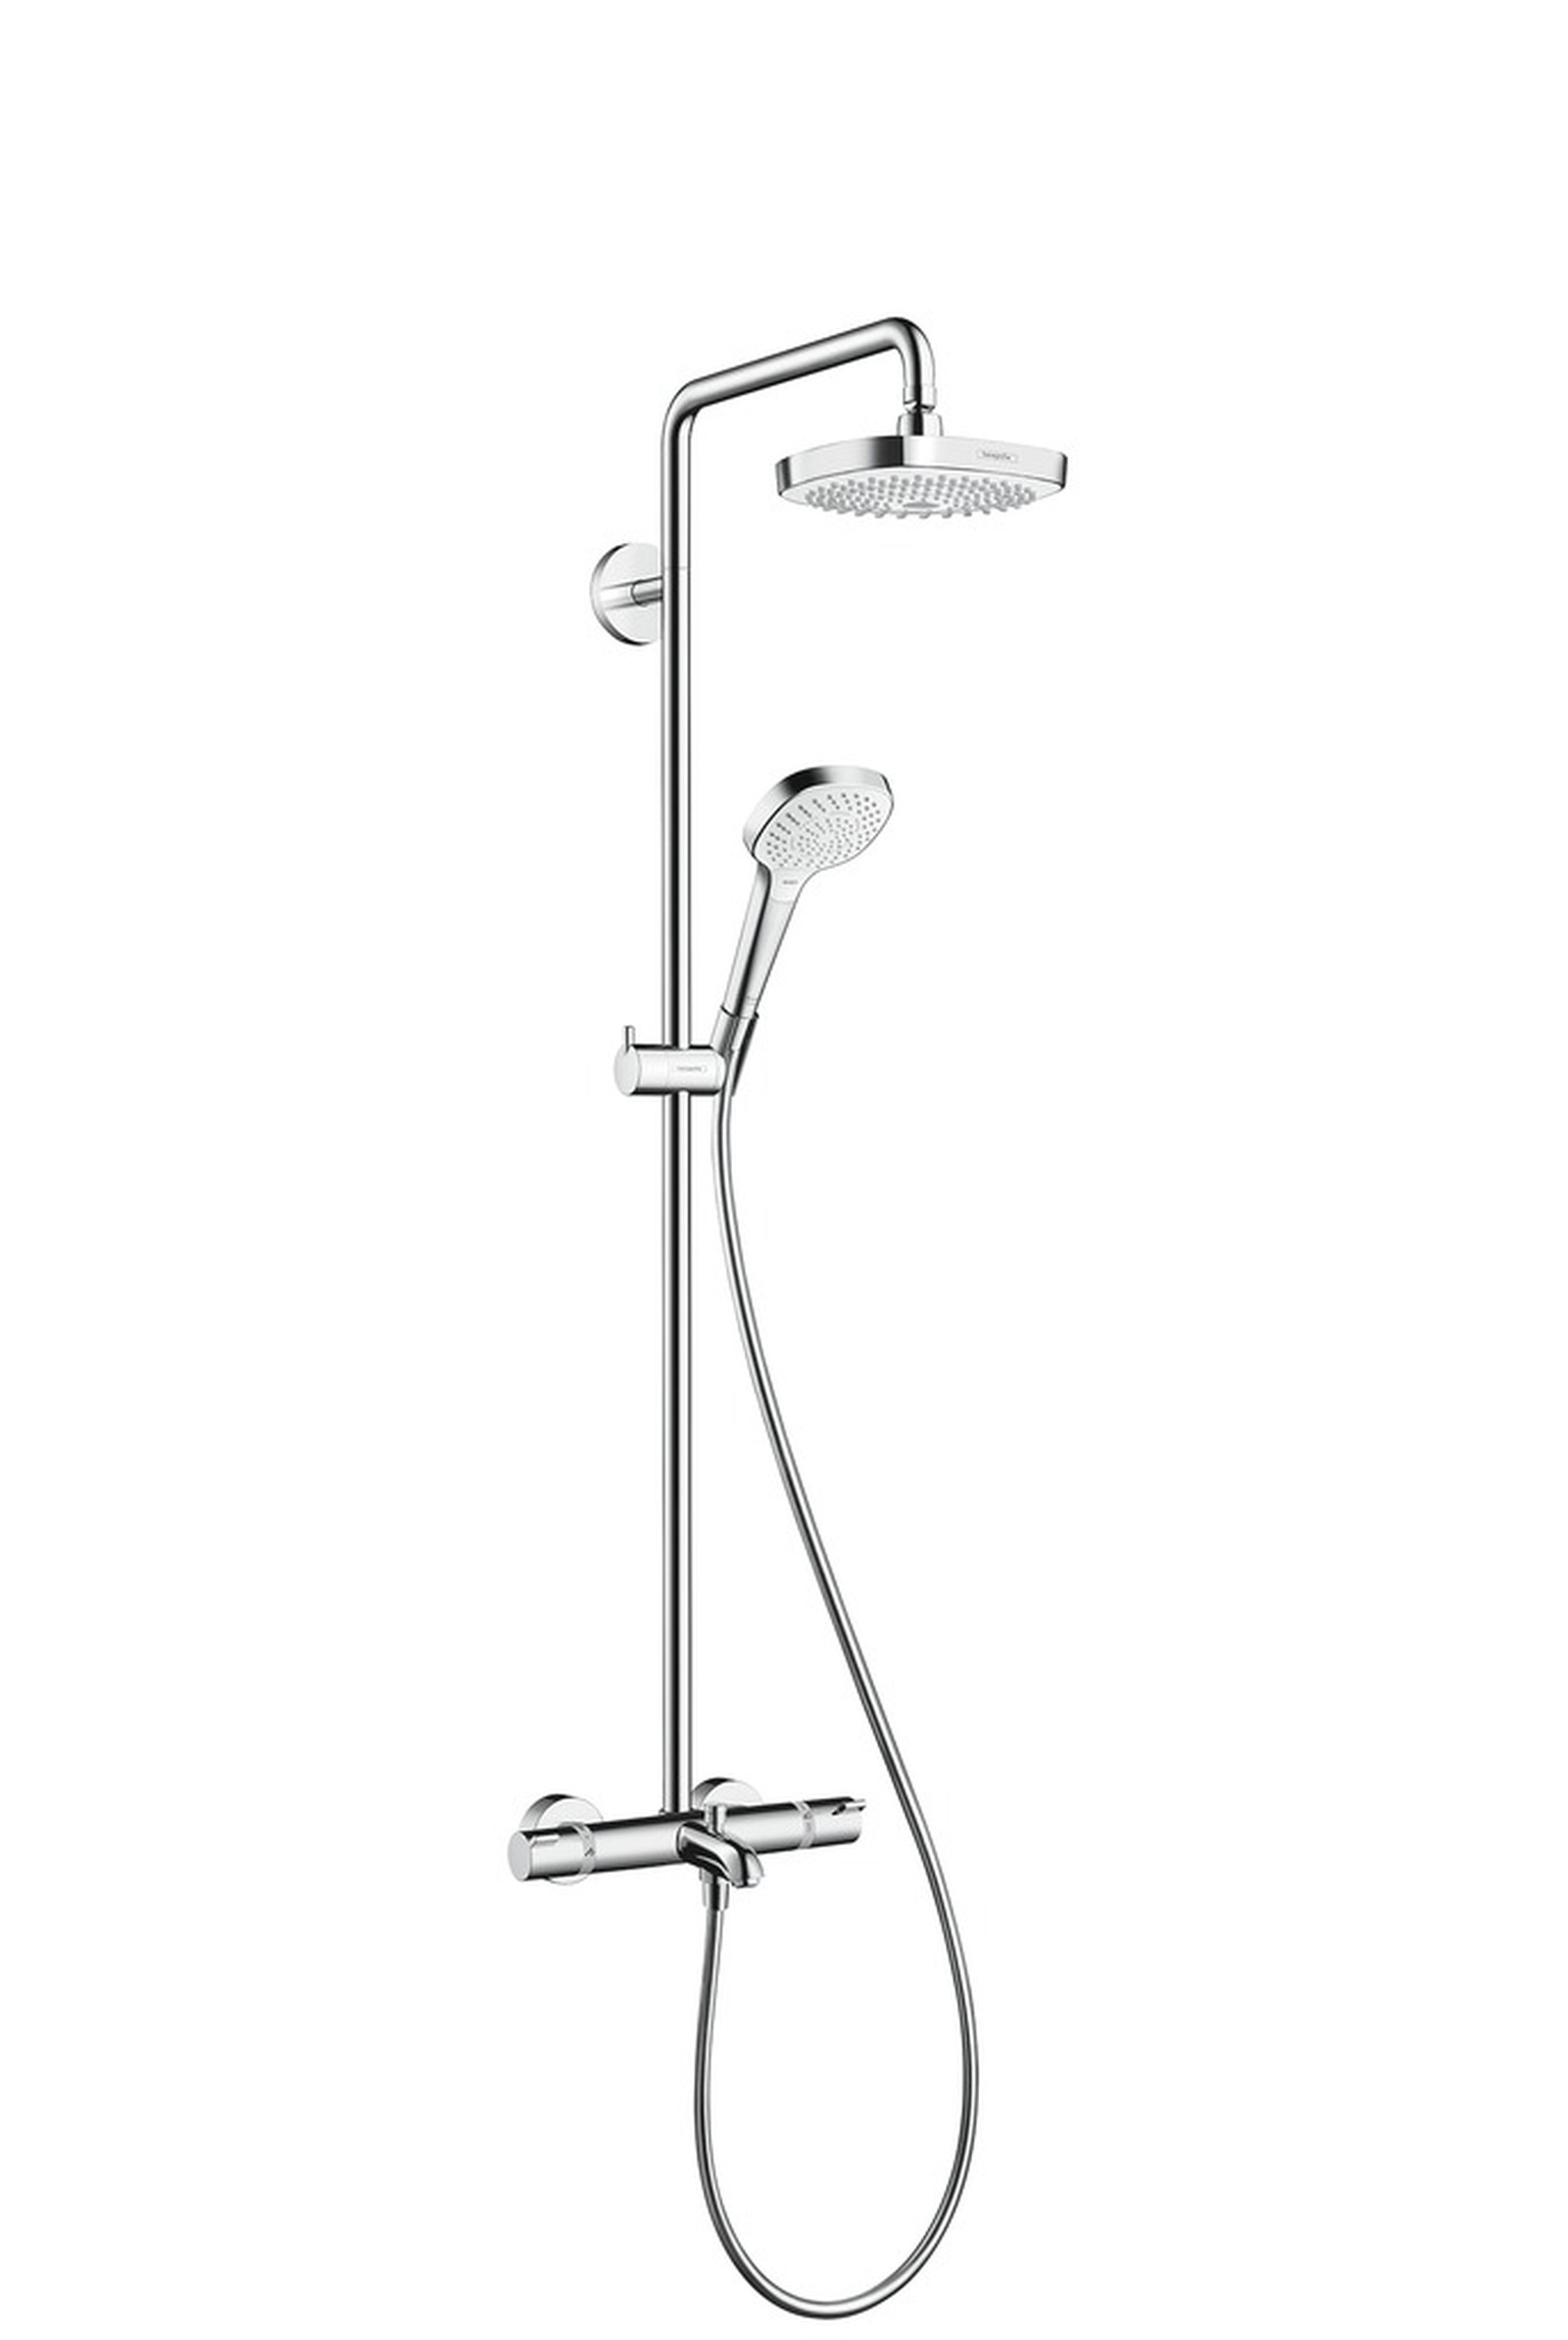 HG Showerpipe Croma Select E 180 Wanne